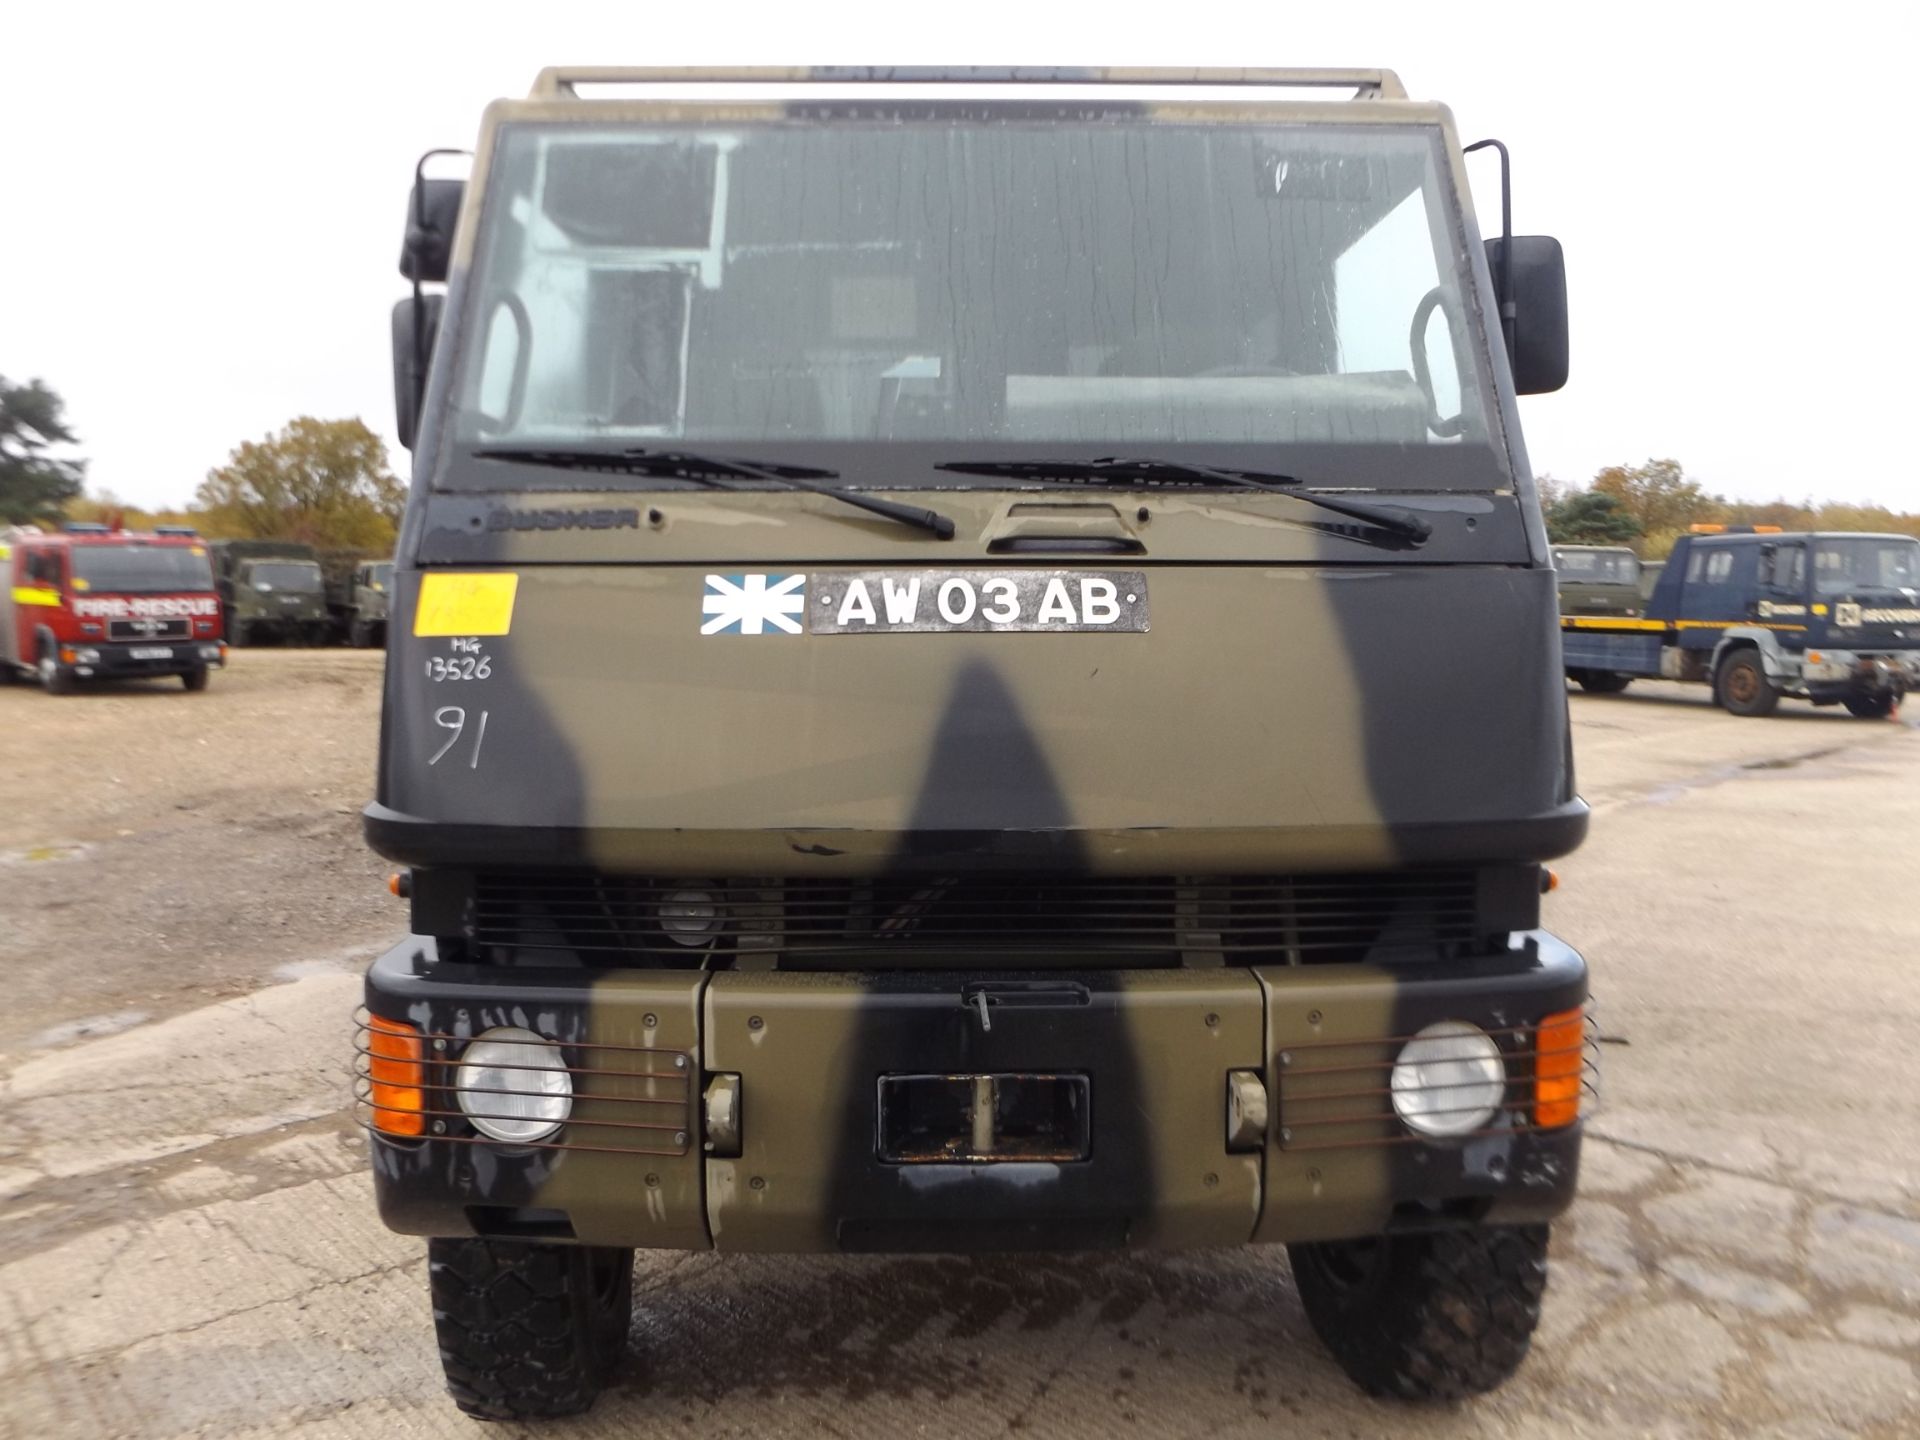 Ex Reserve Left Hand Drive Mowag Bucher Duro II 6x6 High-Mobility Tactical Vehicle - Image 2 of 20